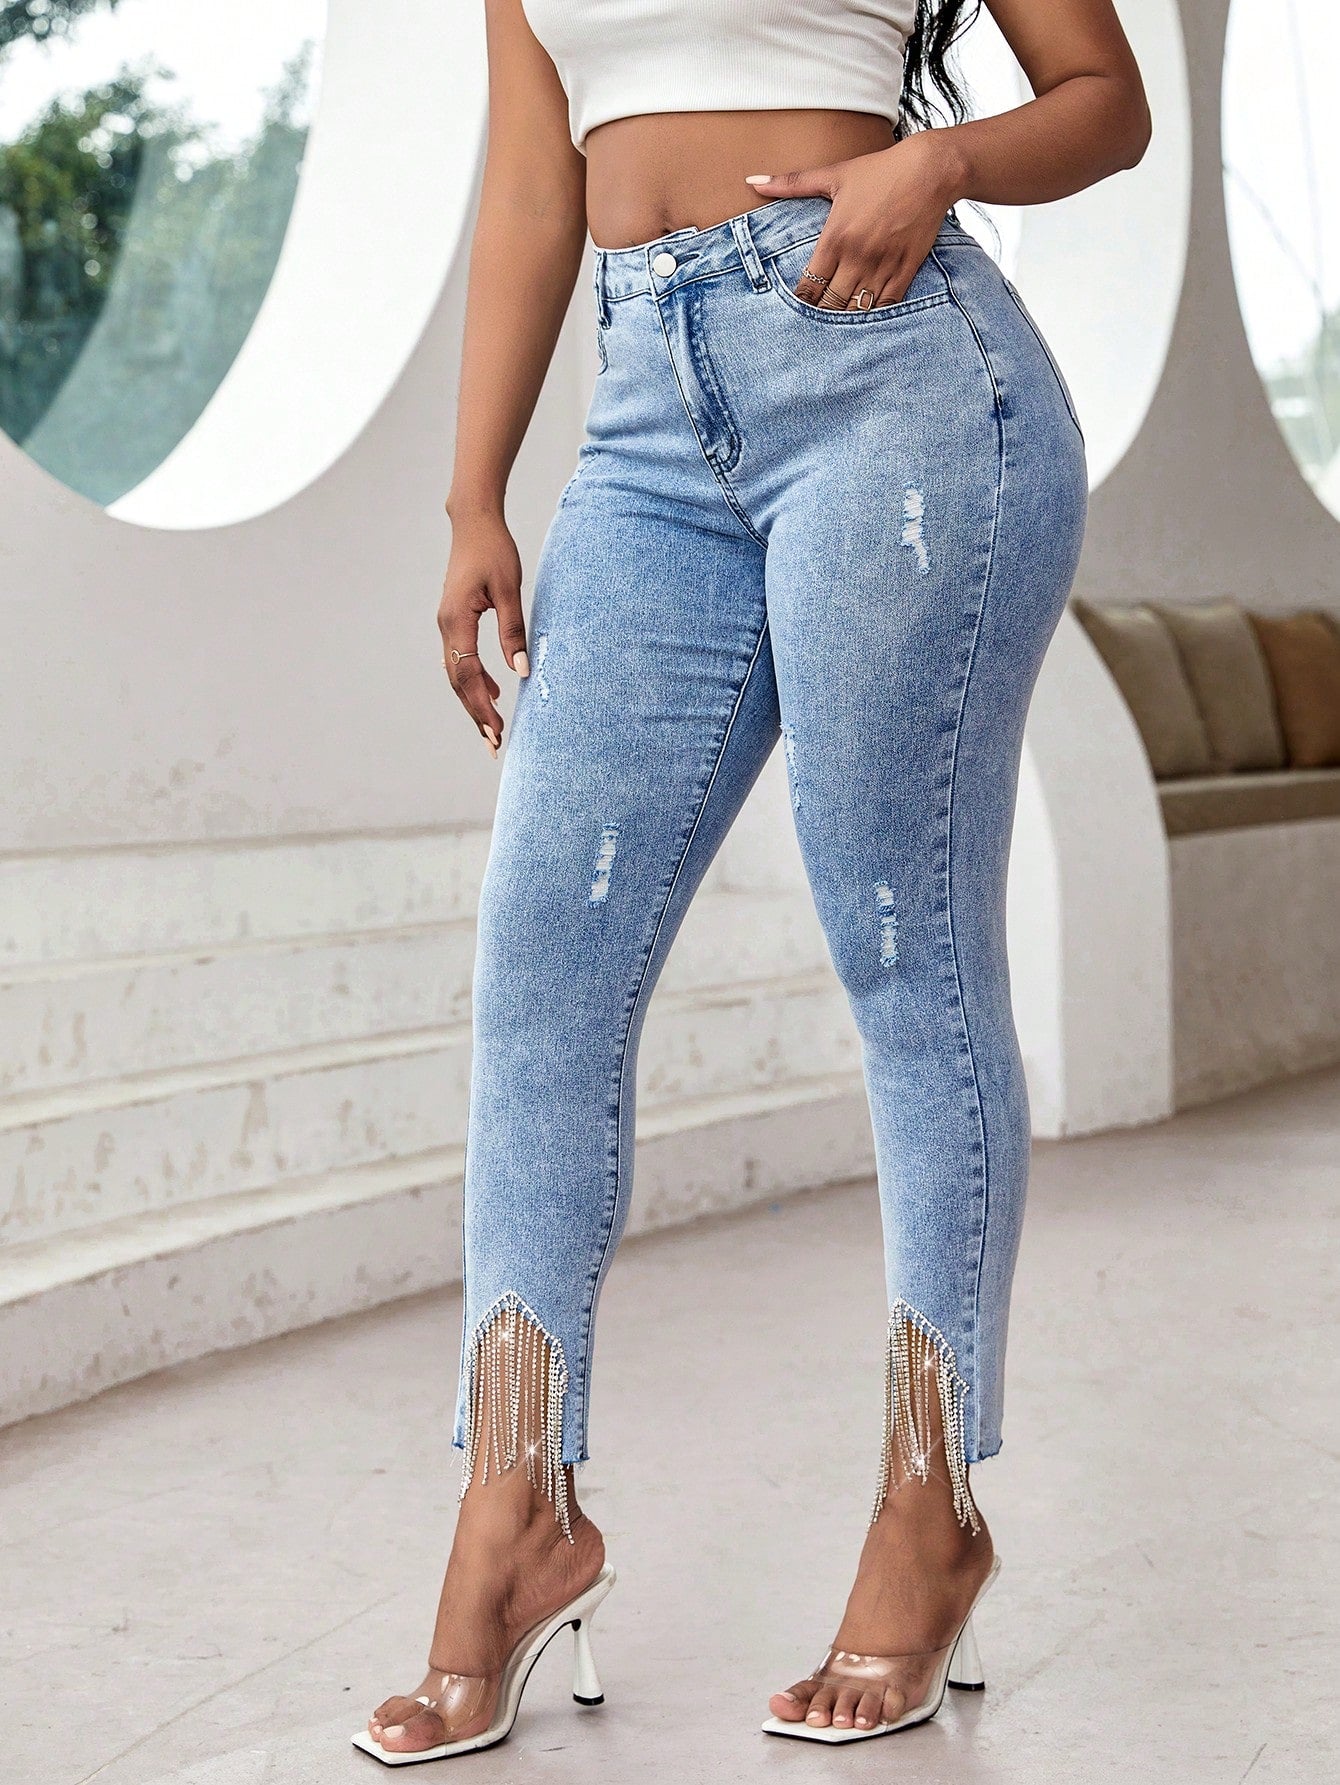 Ripped Rhinestone Fringe Hem Skinny Jeans: The Perfect Blend of Glam and Edgy